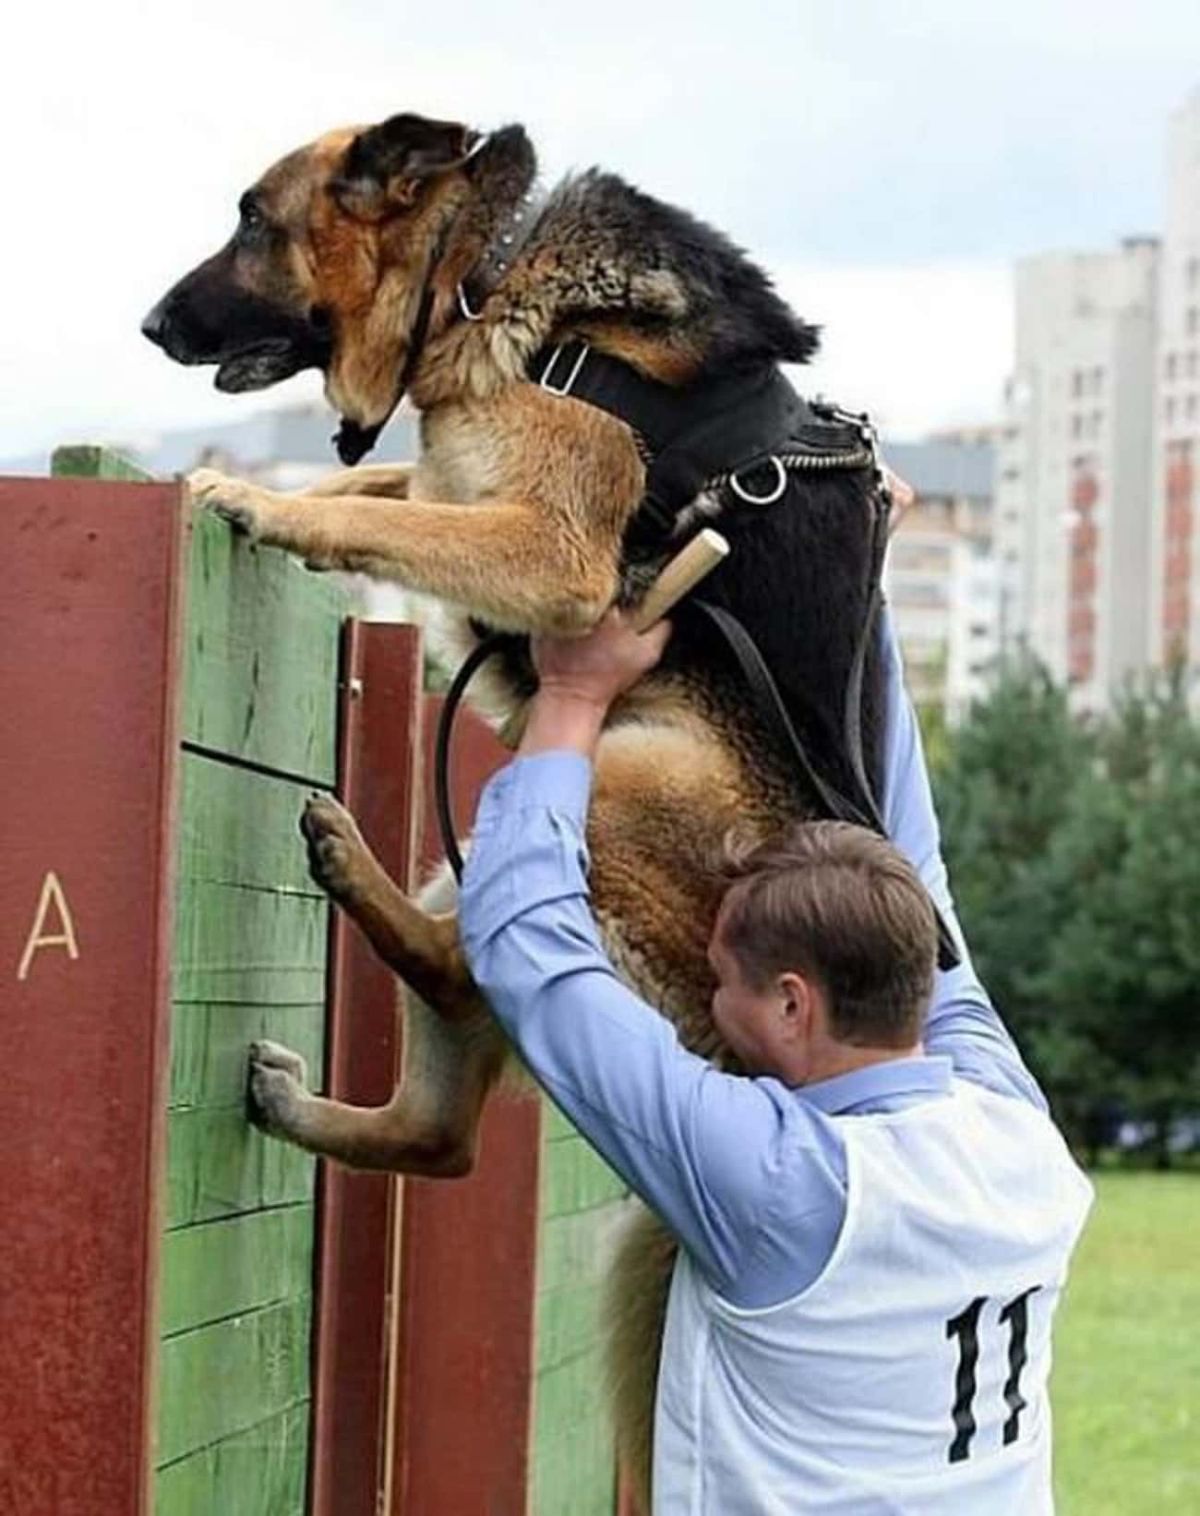 german shepherd wearing black harness behind helped up over a brown and green wall by a man